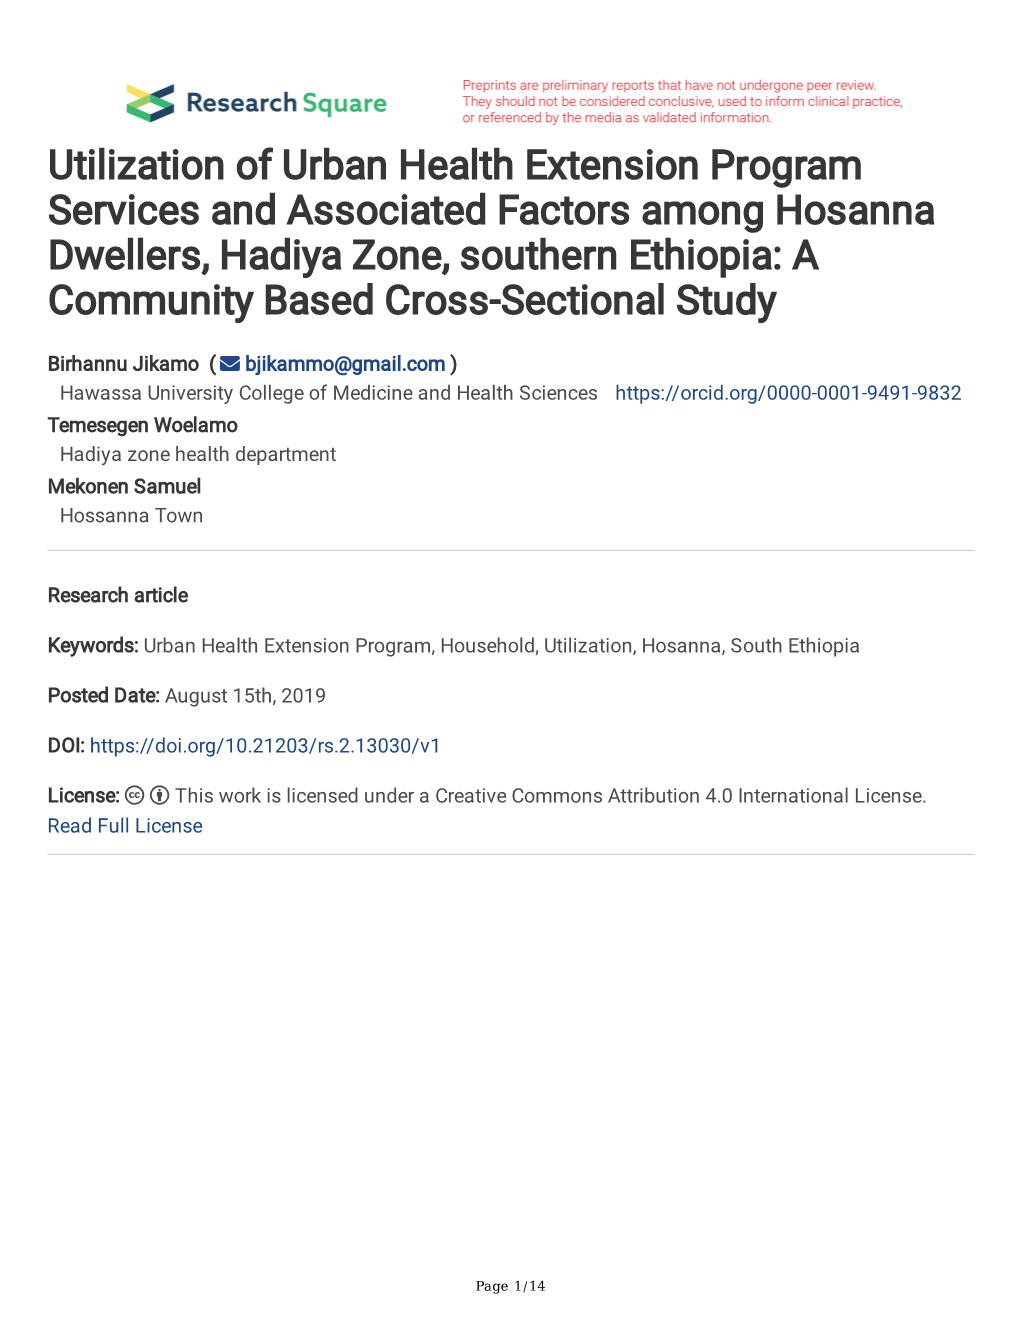 Utilization of Urban Health Extension Program Services and Associated